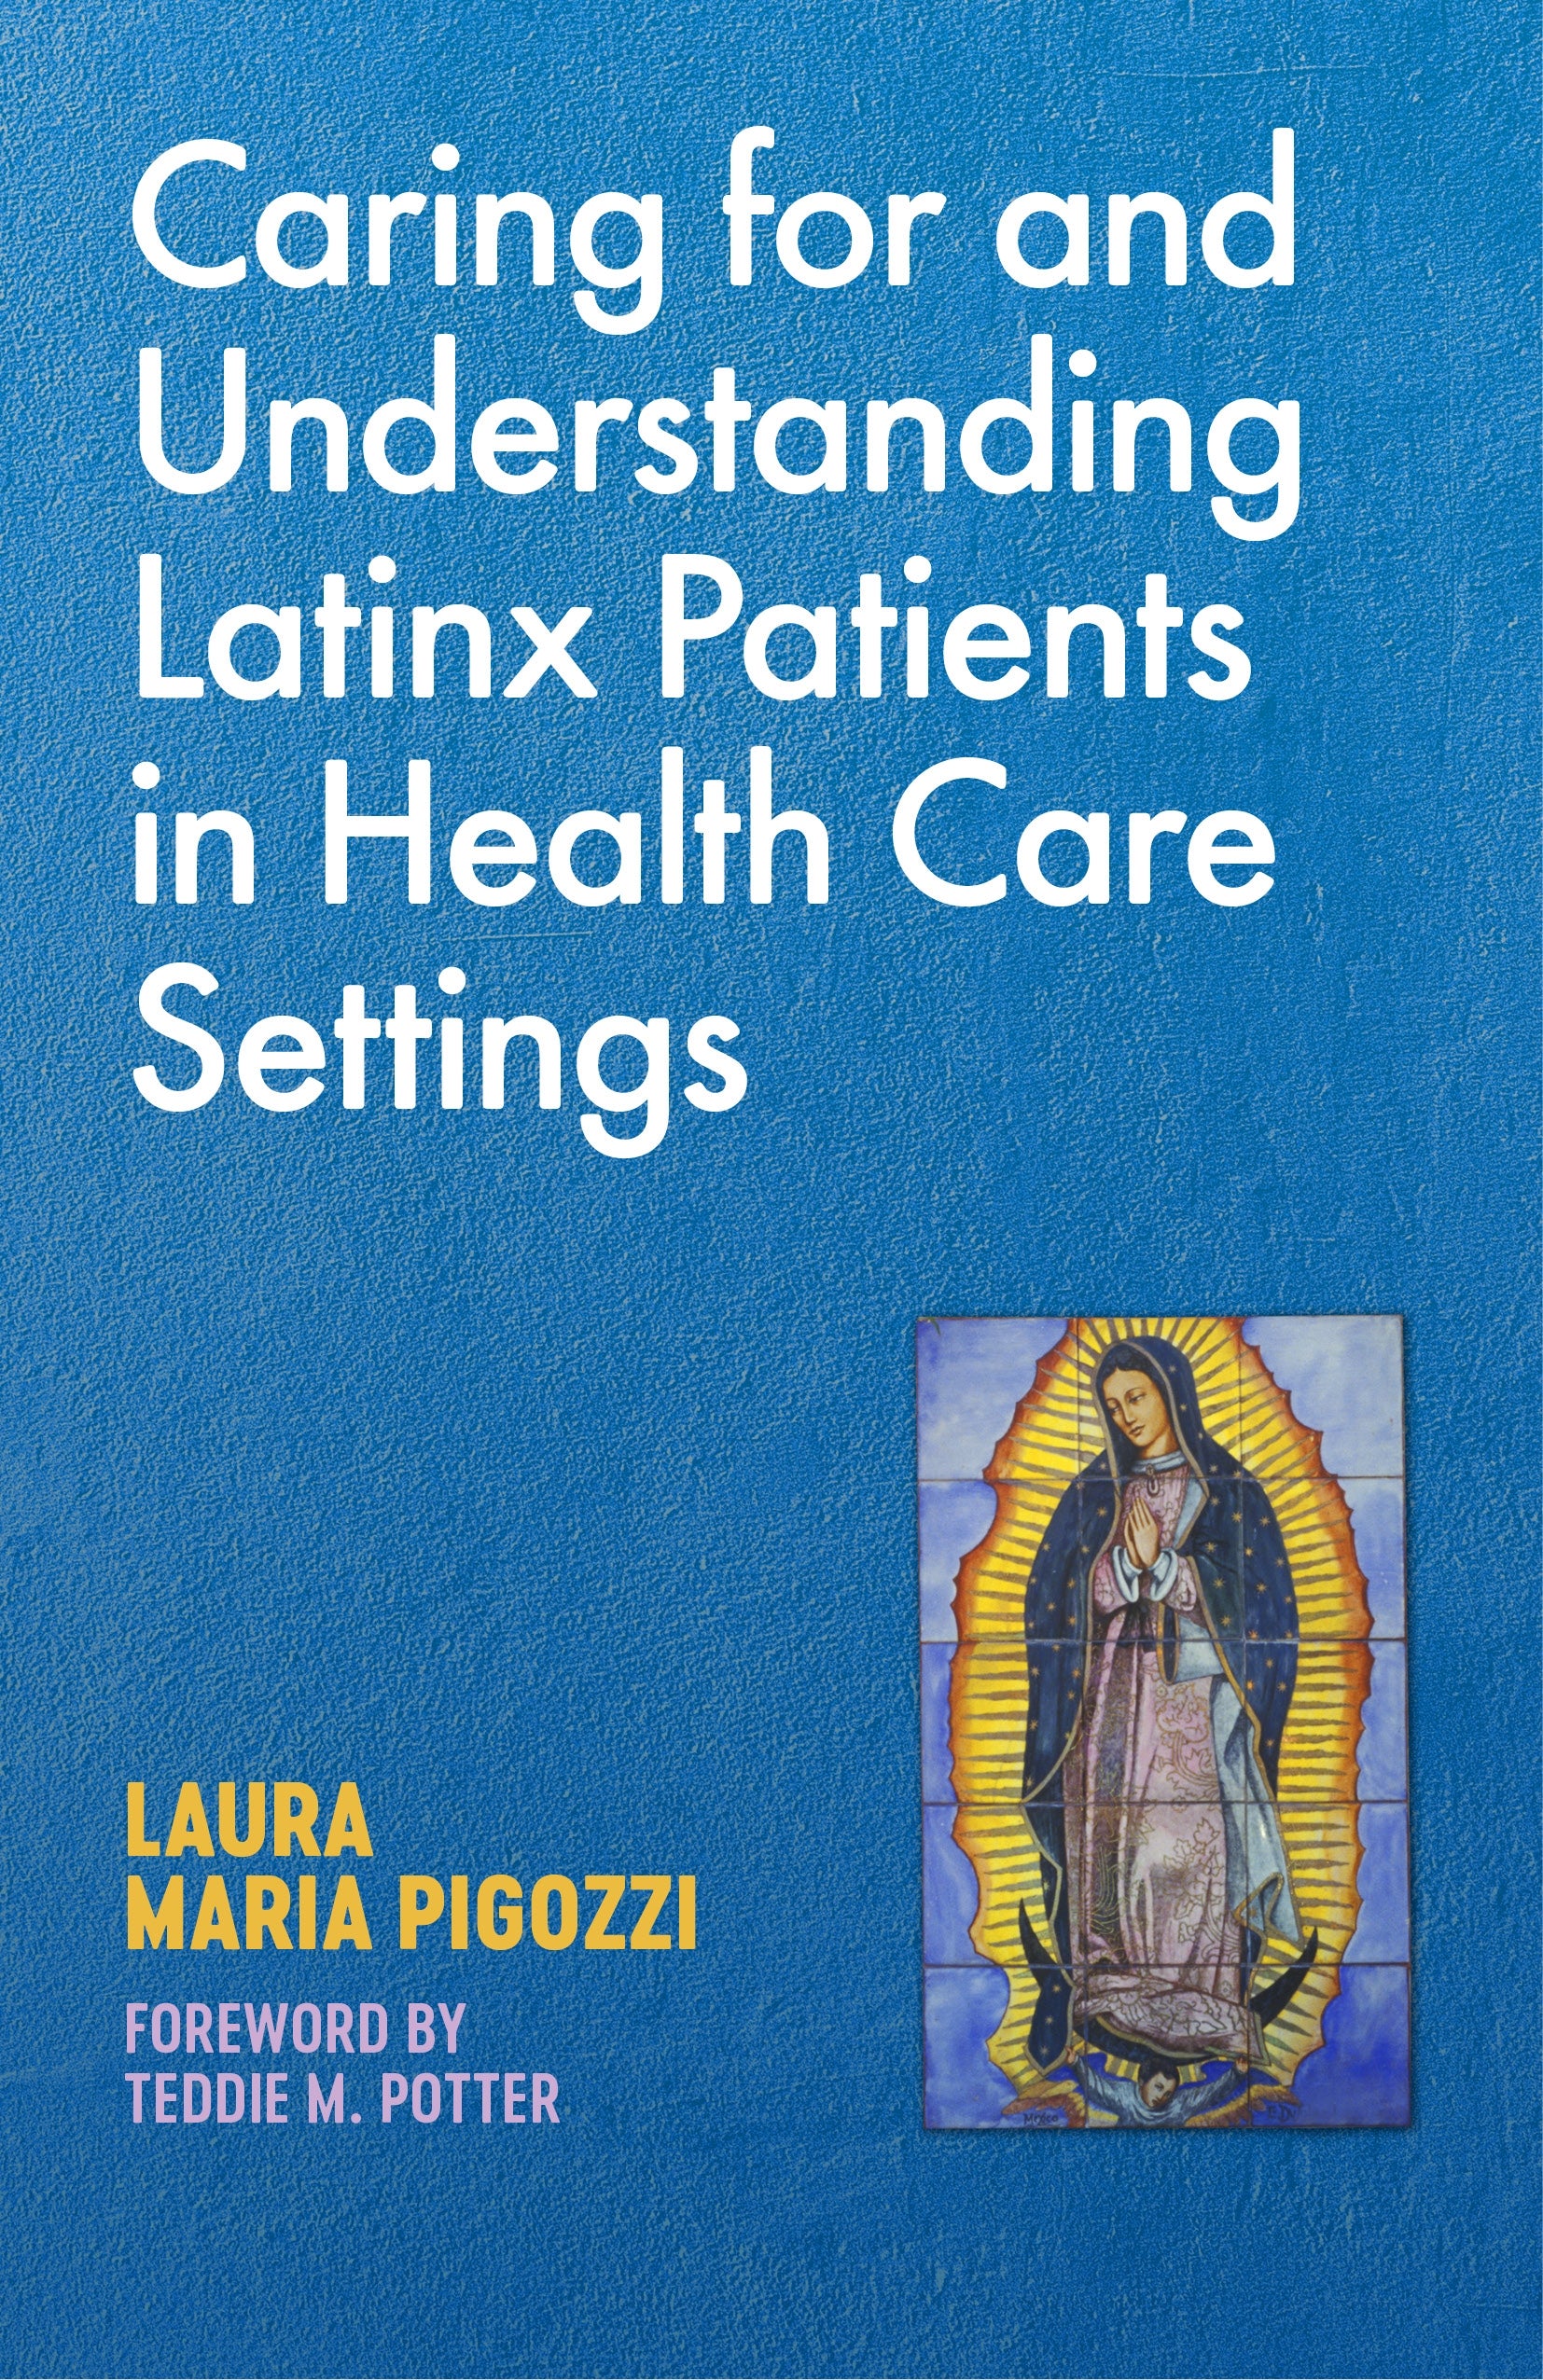 Caring for and Understanding Latinx Patients in Health Care Settings by Laura Maria Pigozzi, Teddie M. Potter